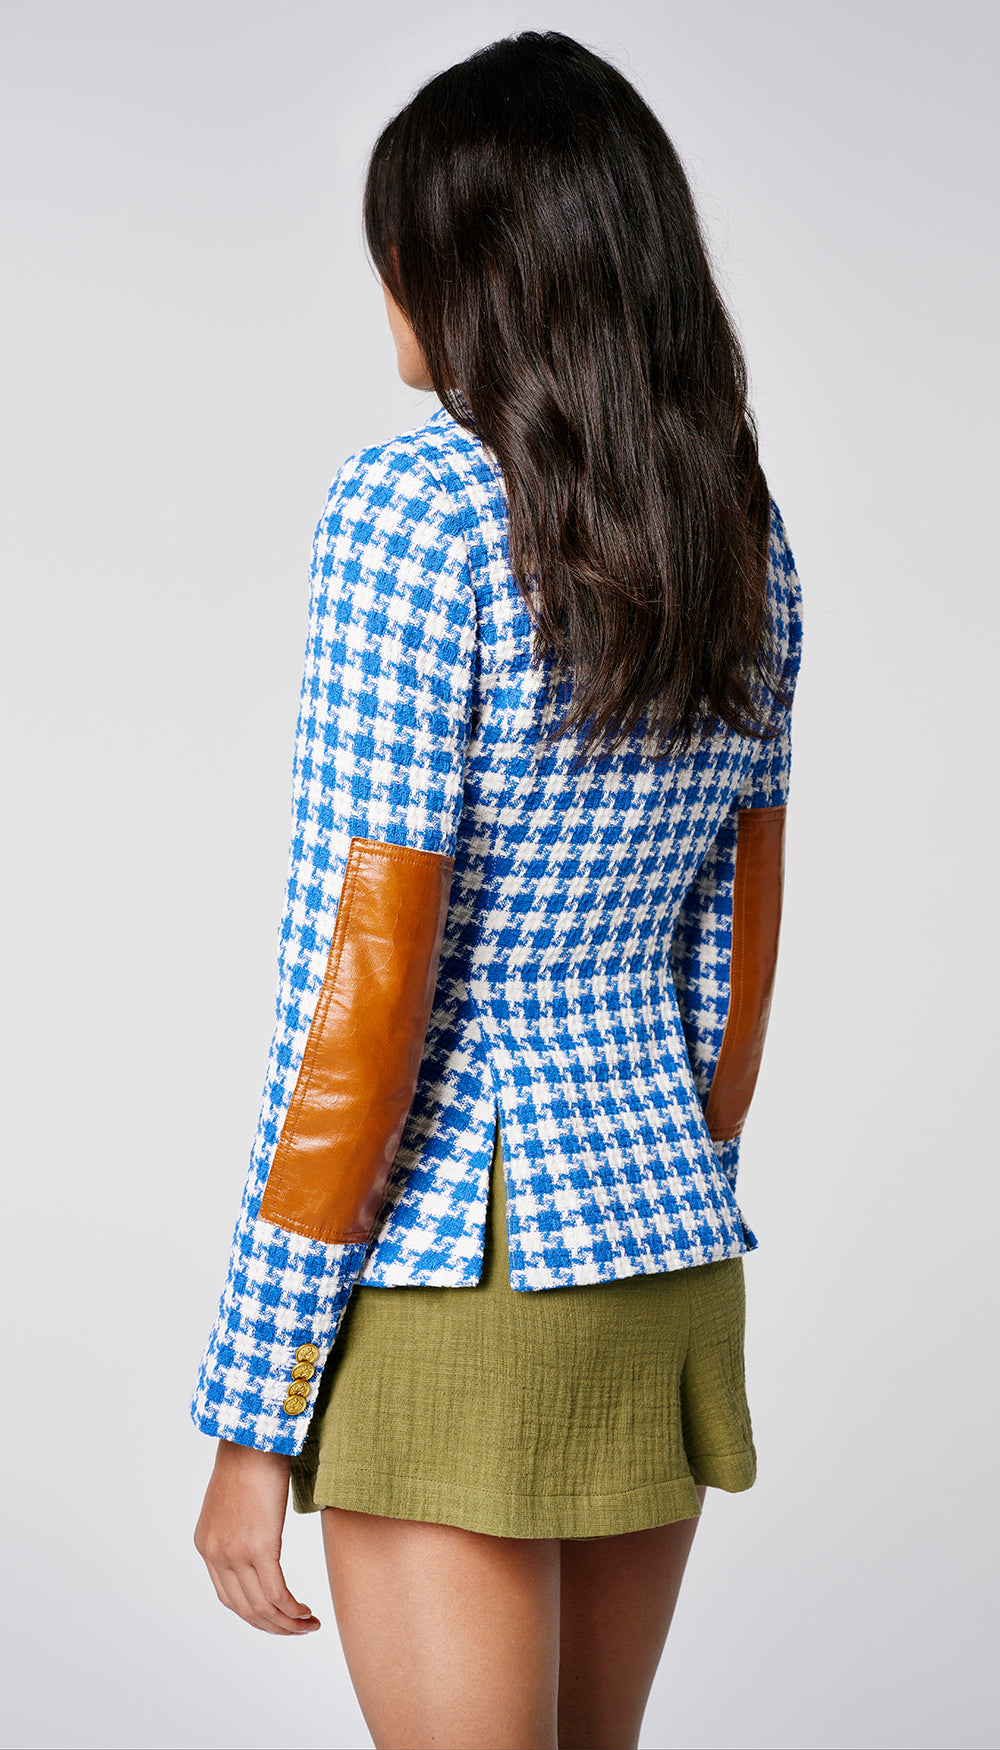 The back of a woman in a blue and white houndstooth blazer.